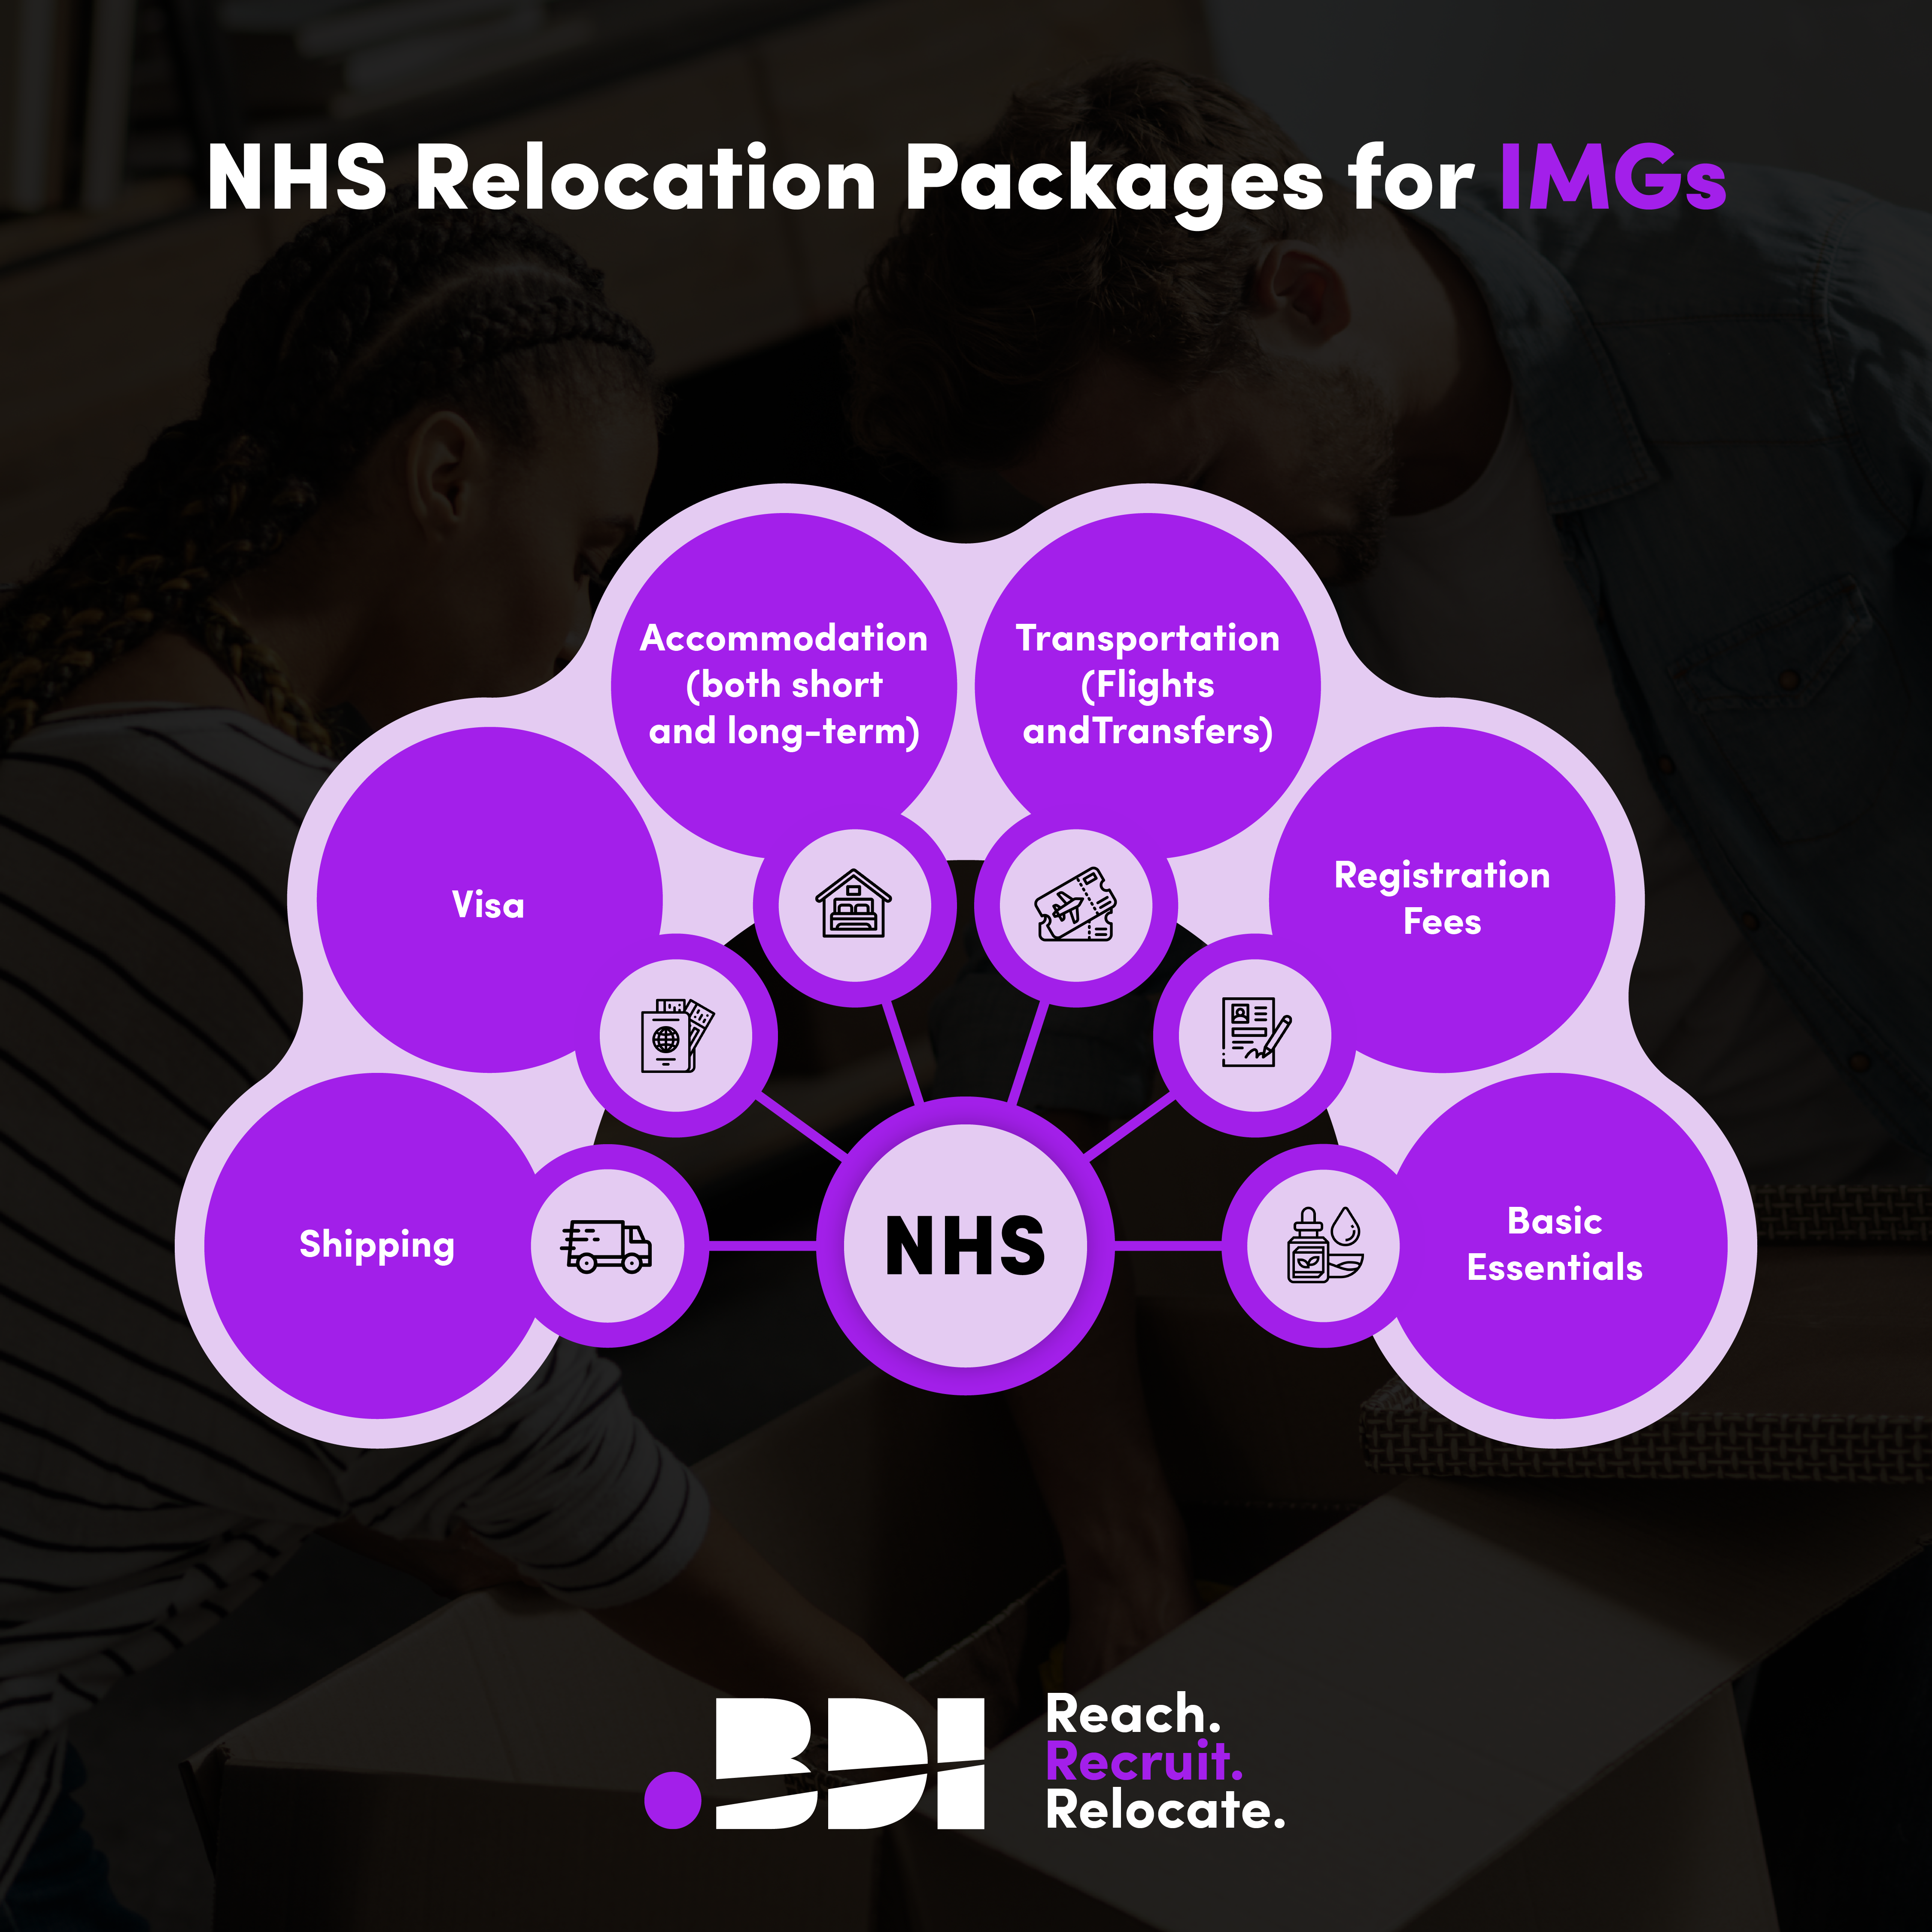 Infographic depicting the different elements of an NHS relocation package